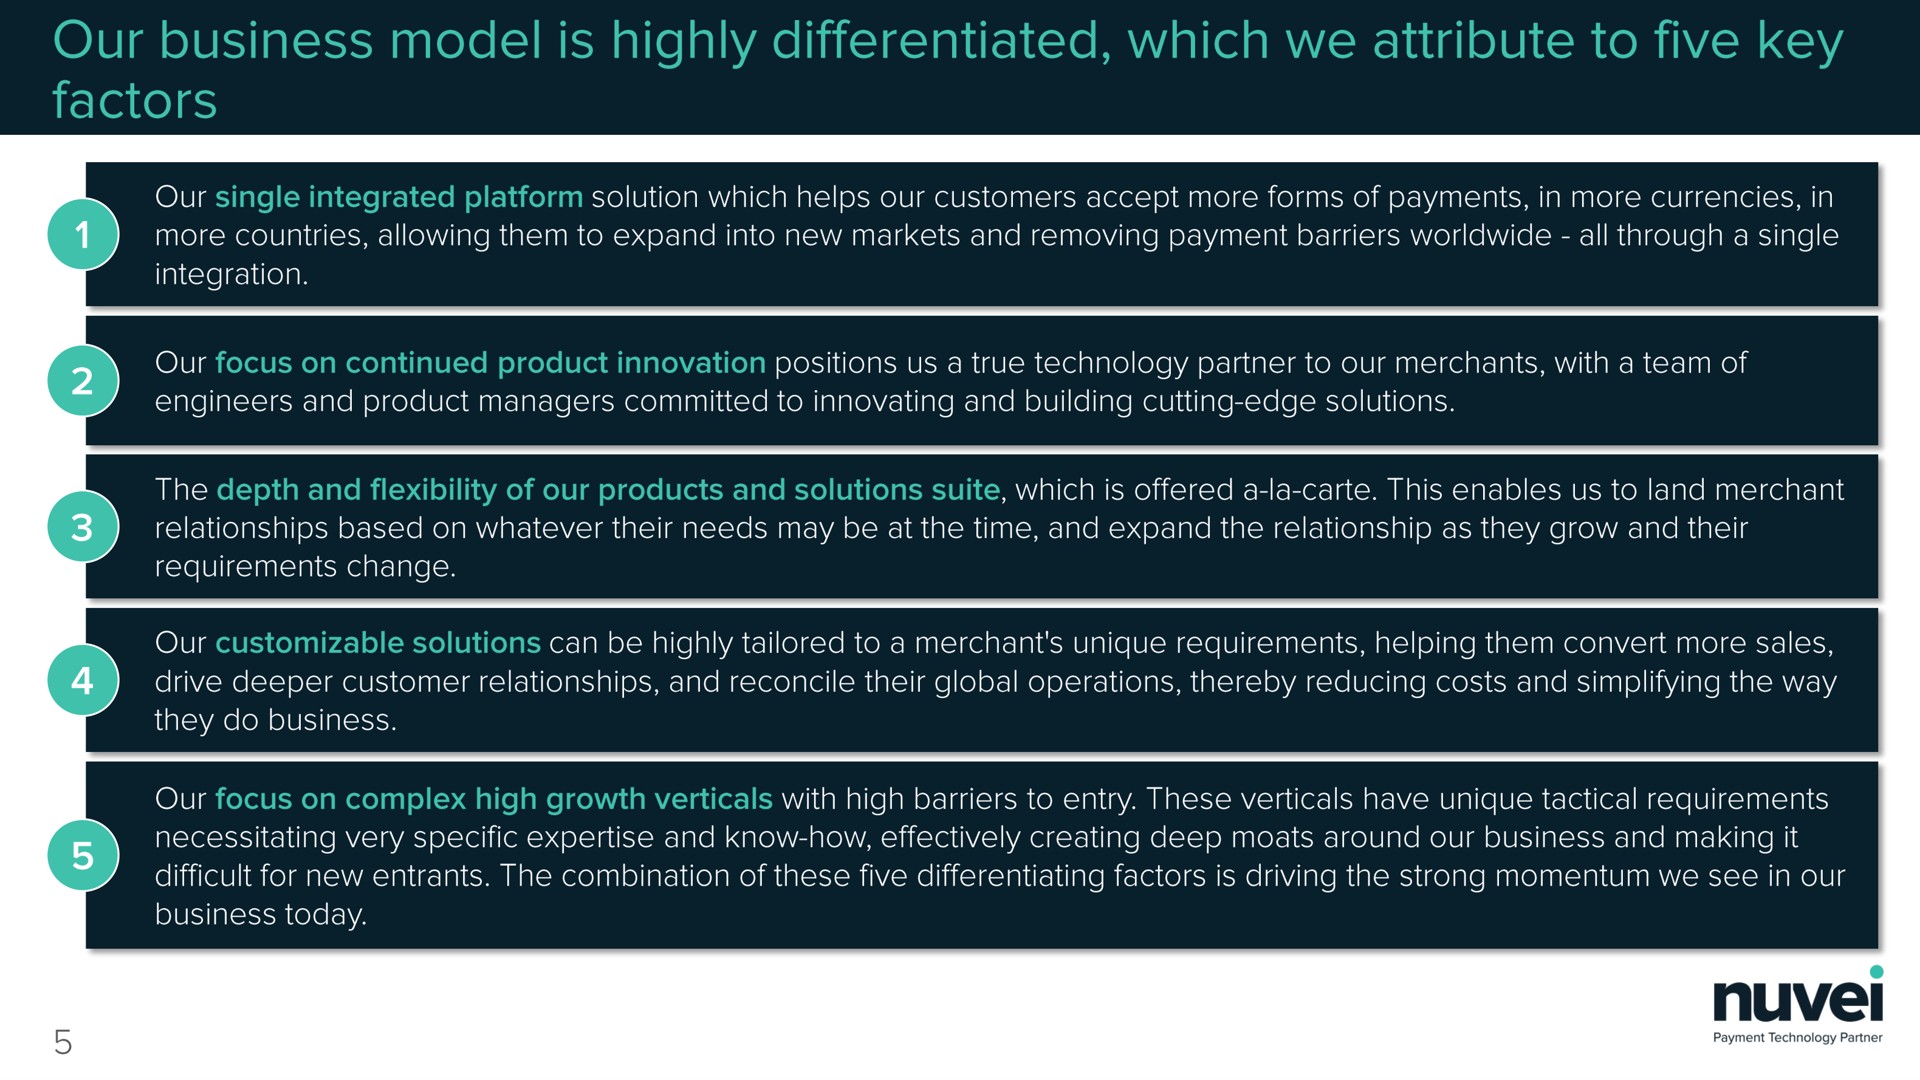 our business model is highly differentiated which we attribute to five key factors | Nuvei